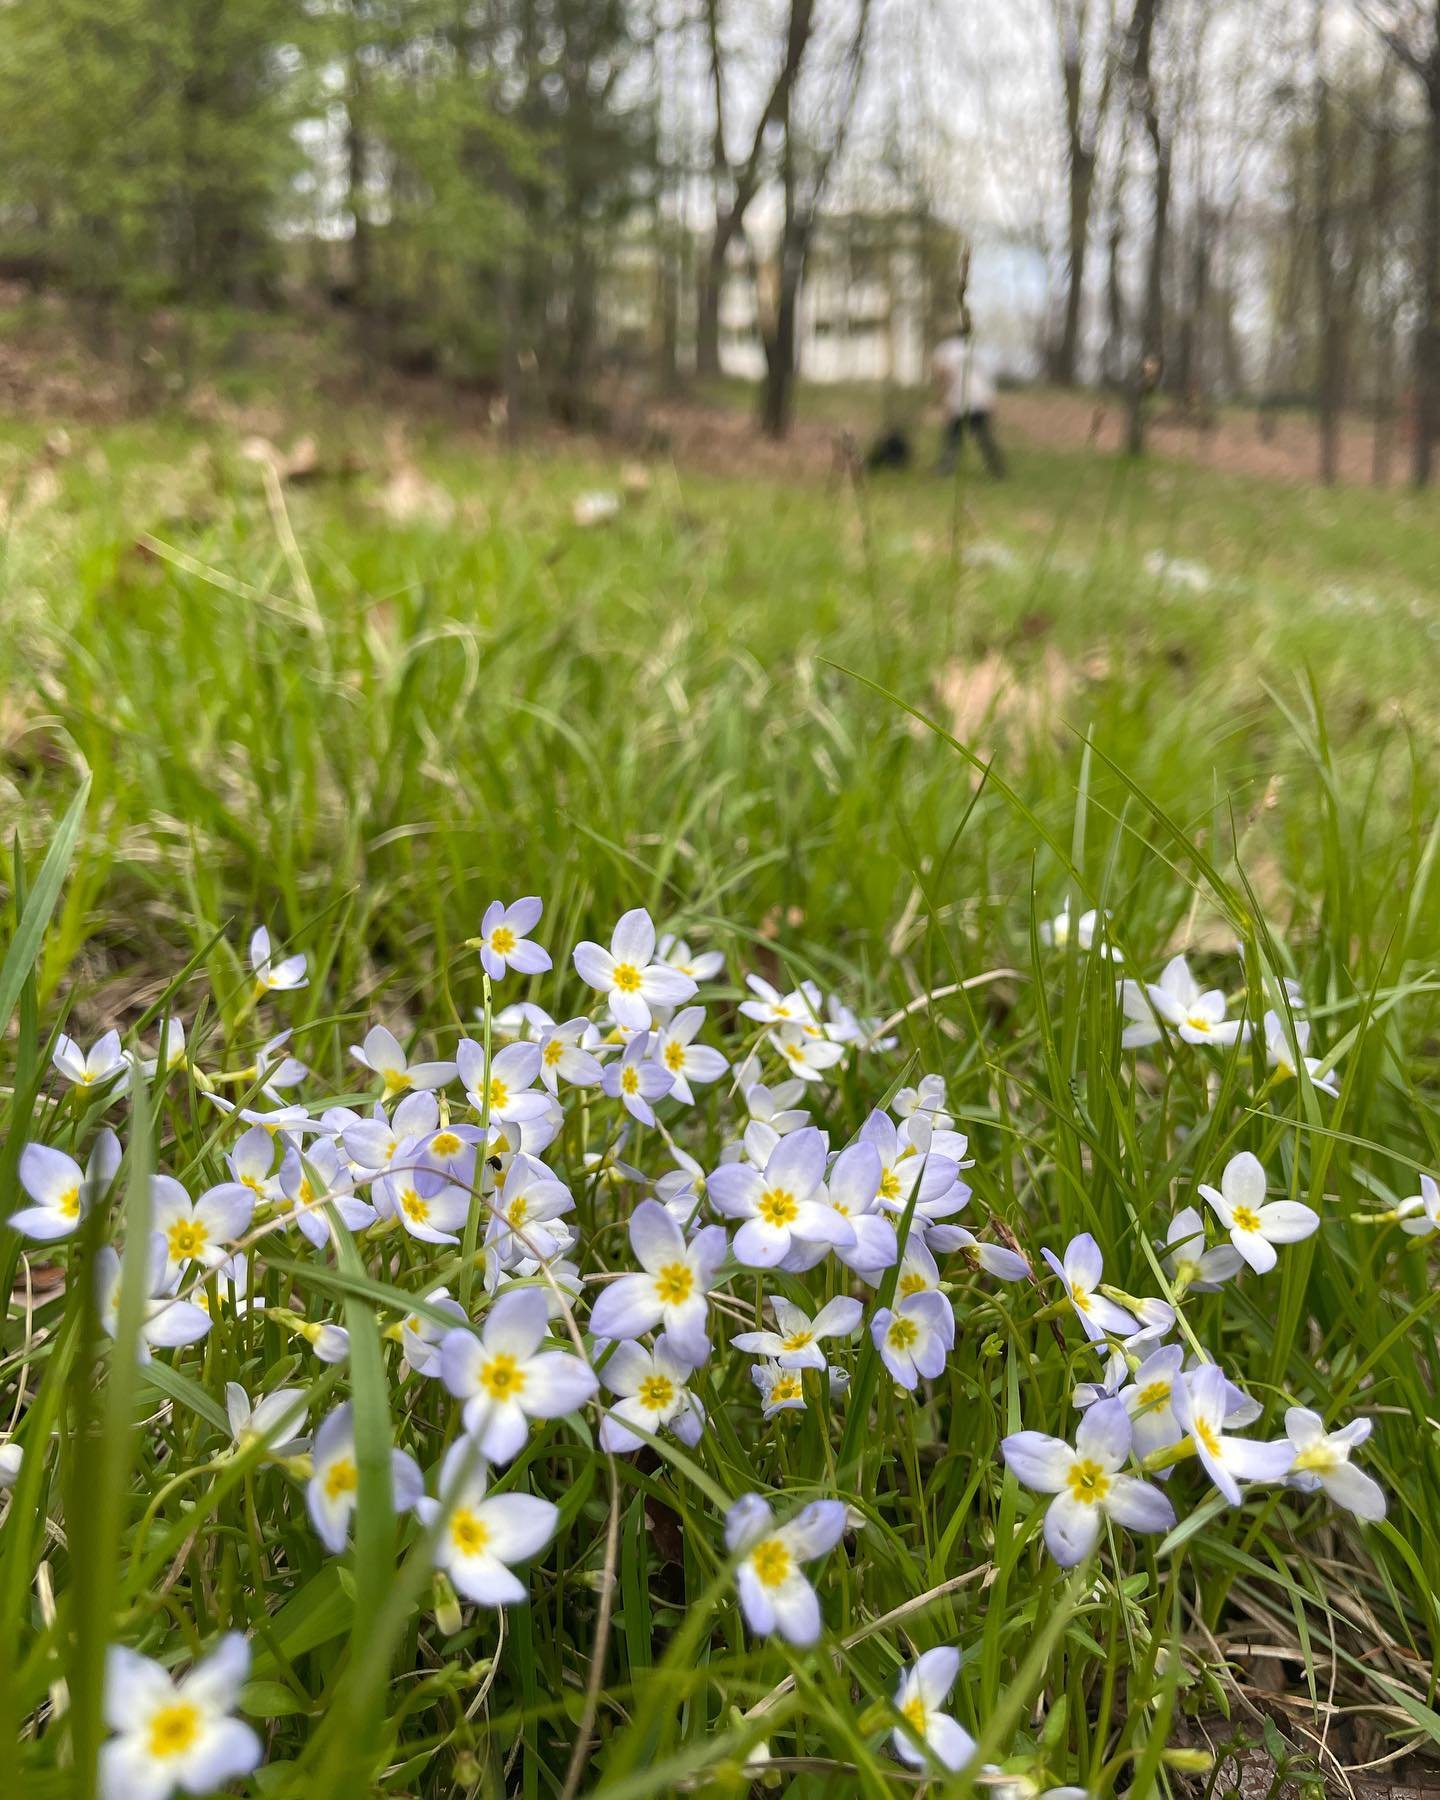 Flowers and disc golf. 🌸🥏

Nature holds the antidote to the season.
And just a few minutes outside in it, EVEN IN THE RAIN, is so healing and recalibrating to our natural state of balance.

Get outside. 🌱

#nature #naturemedicine #discgolf #connec